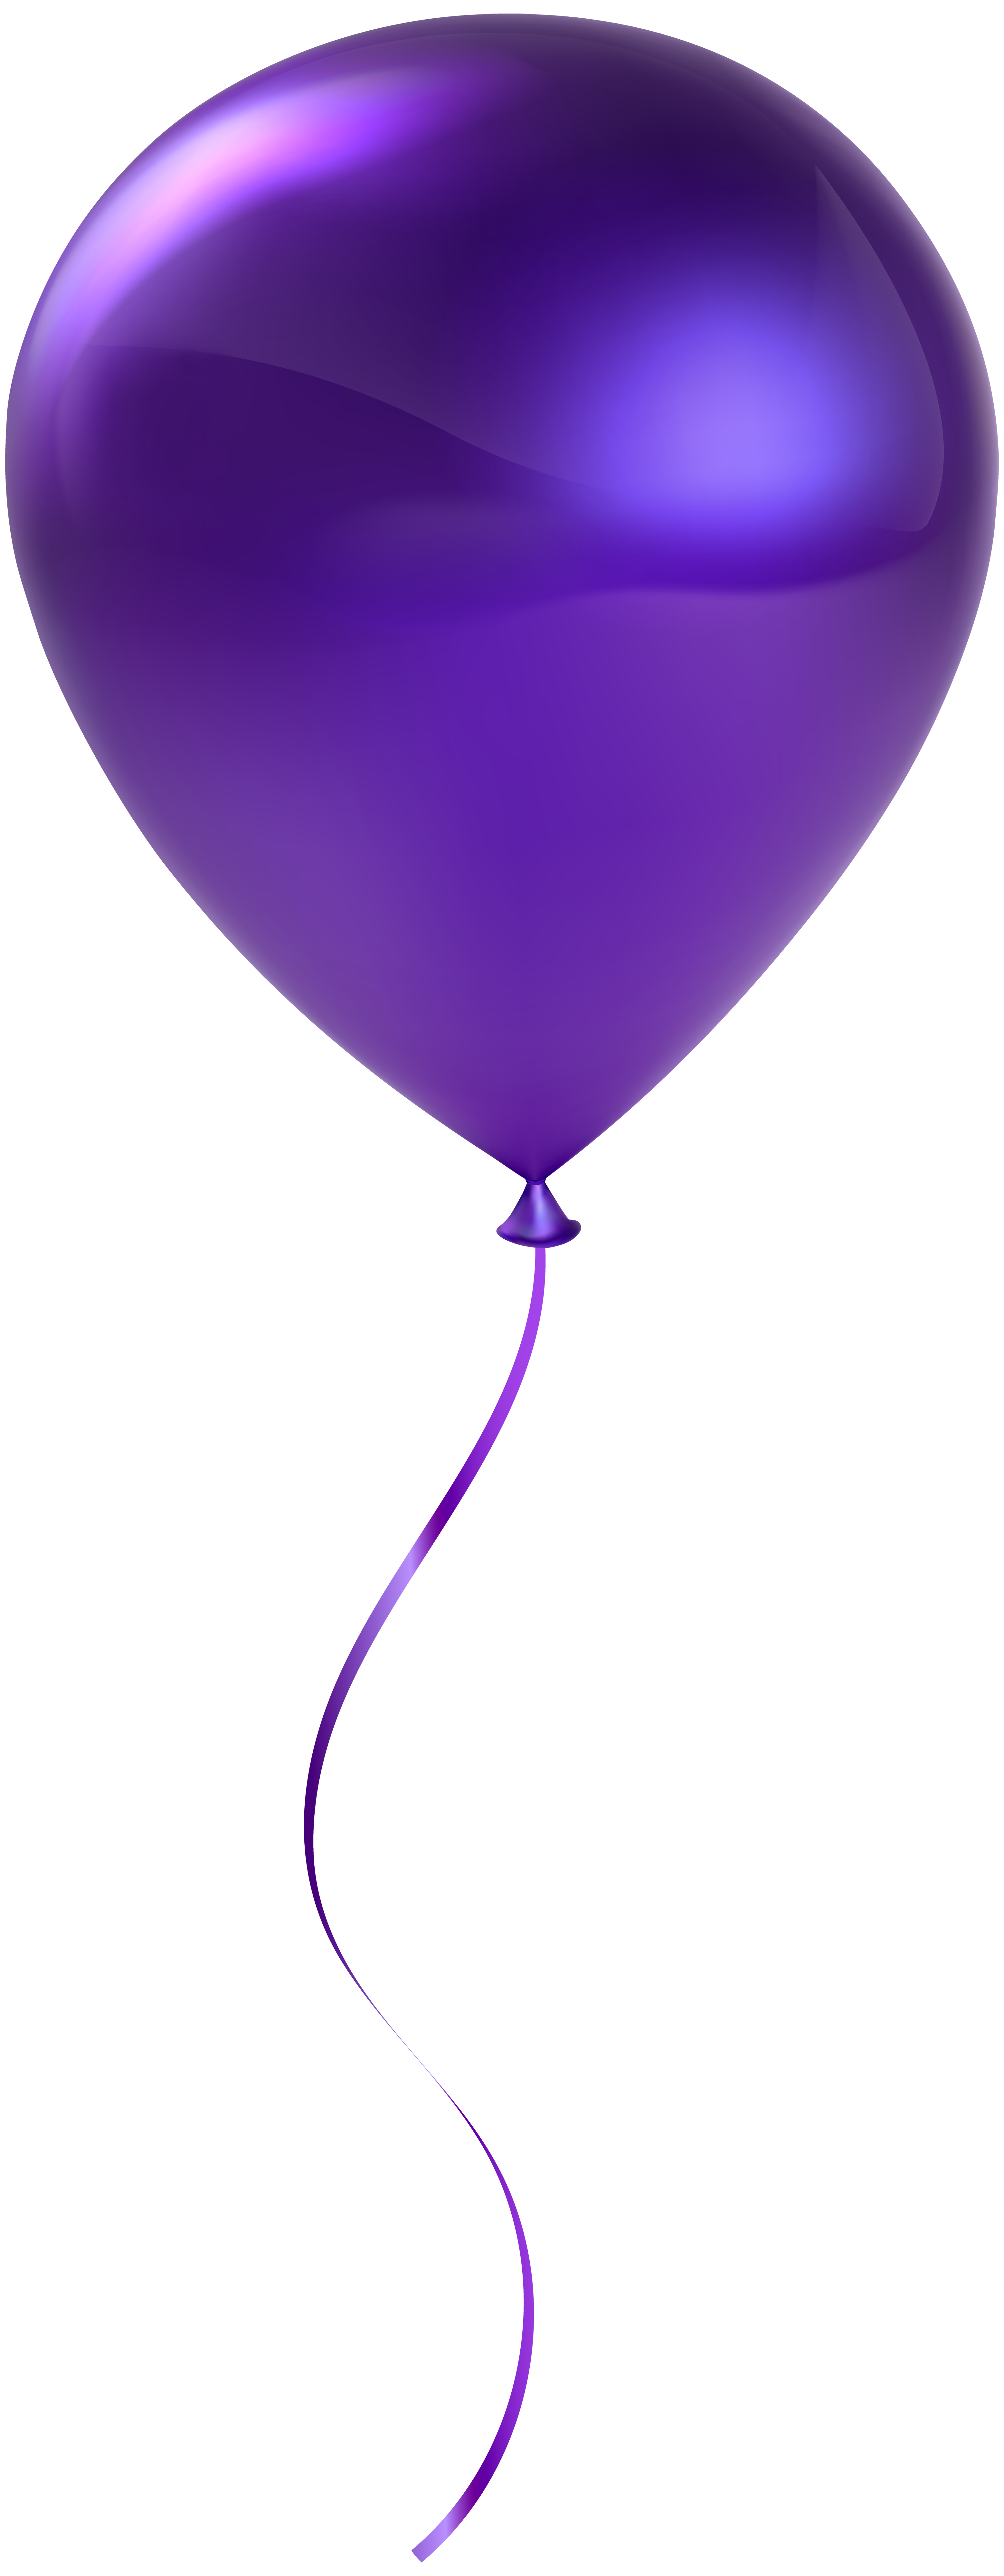 clipart balloons violet